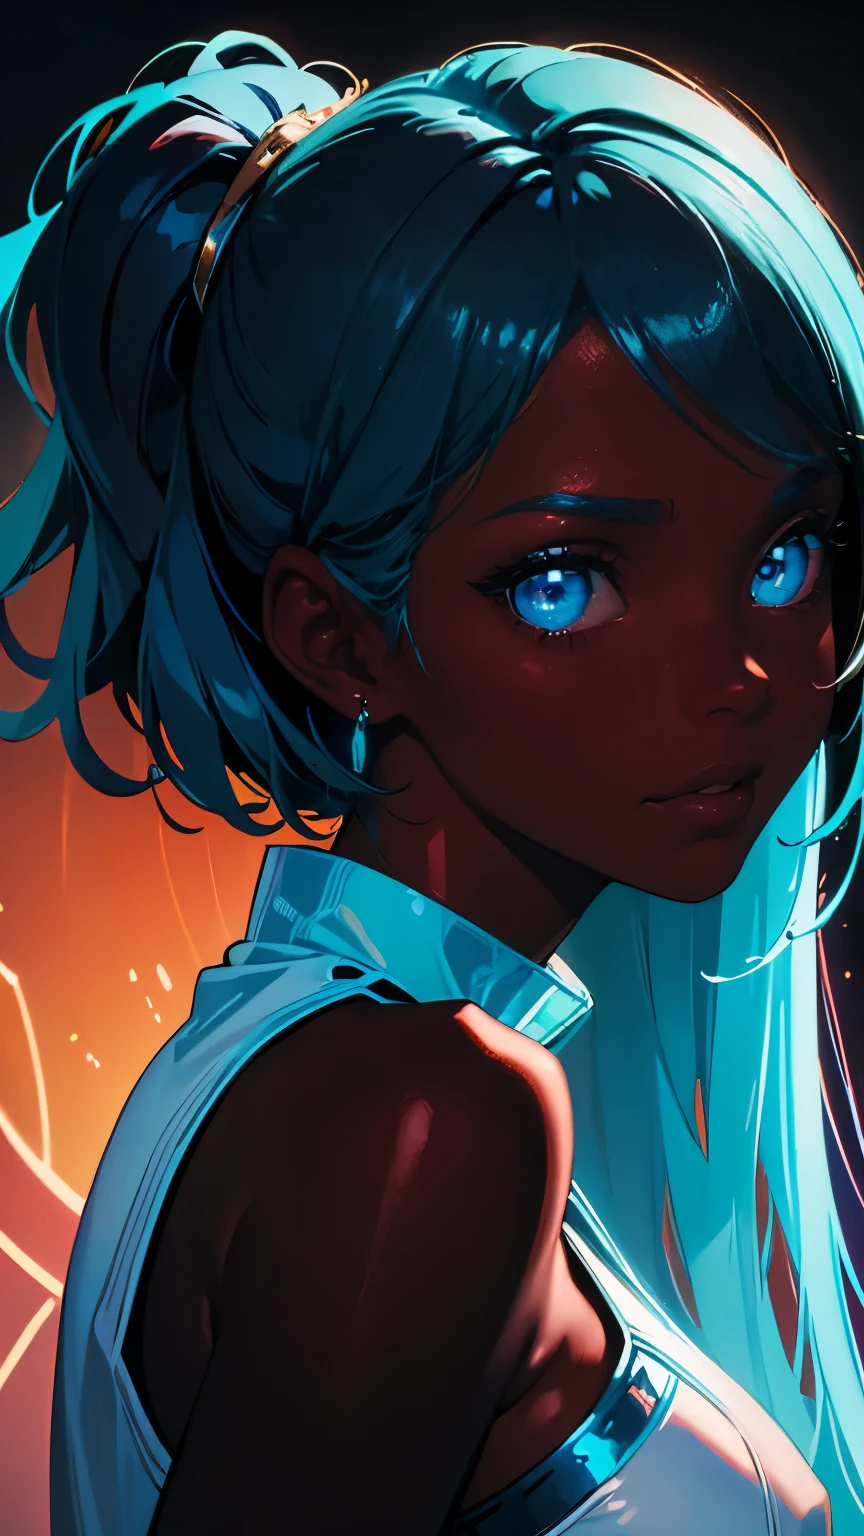 Pretty black woman with a champagne flute, funkypop, cyberdelic, grunge, hyperrealistic anime, lofi art, luminism, manga, medium shot, chemiluminescence, flare, flourescent lightin, character design, atey ghailan, basquiat, colorful_frequencies, ink, aqua colors, auburn color, black olive, blue violet, bordo color, burnt sienna, electric colors, iridescent, dynamic pose, nouveau realisme, city background, Burberry, african american, femme fatale